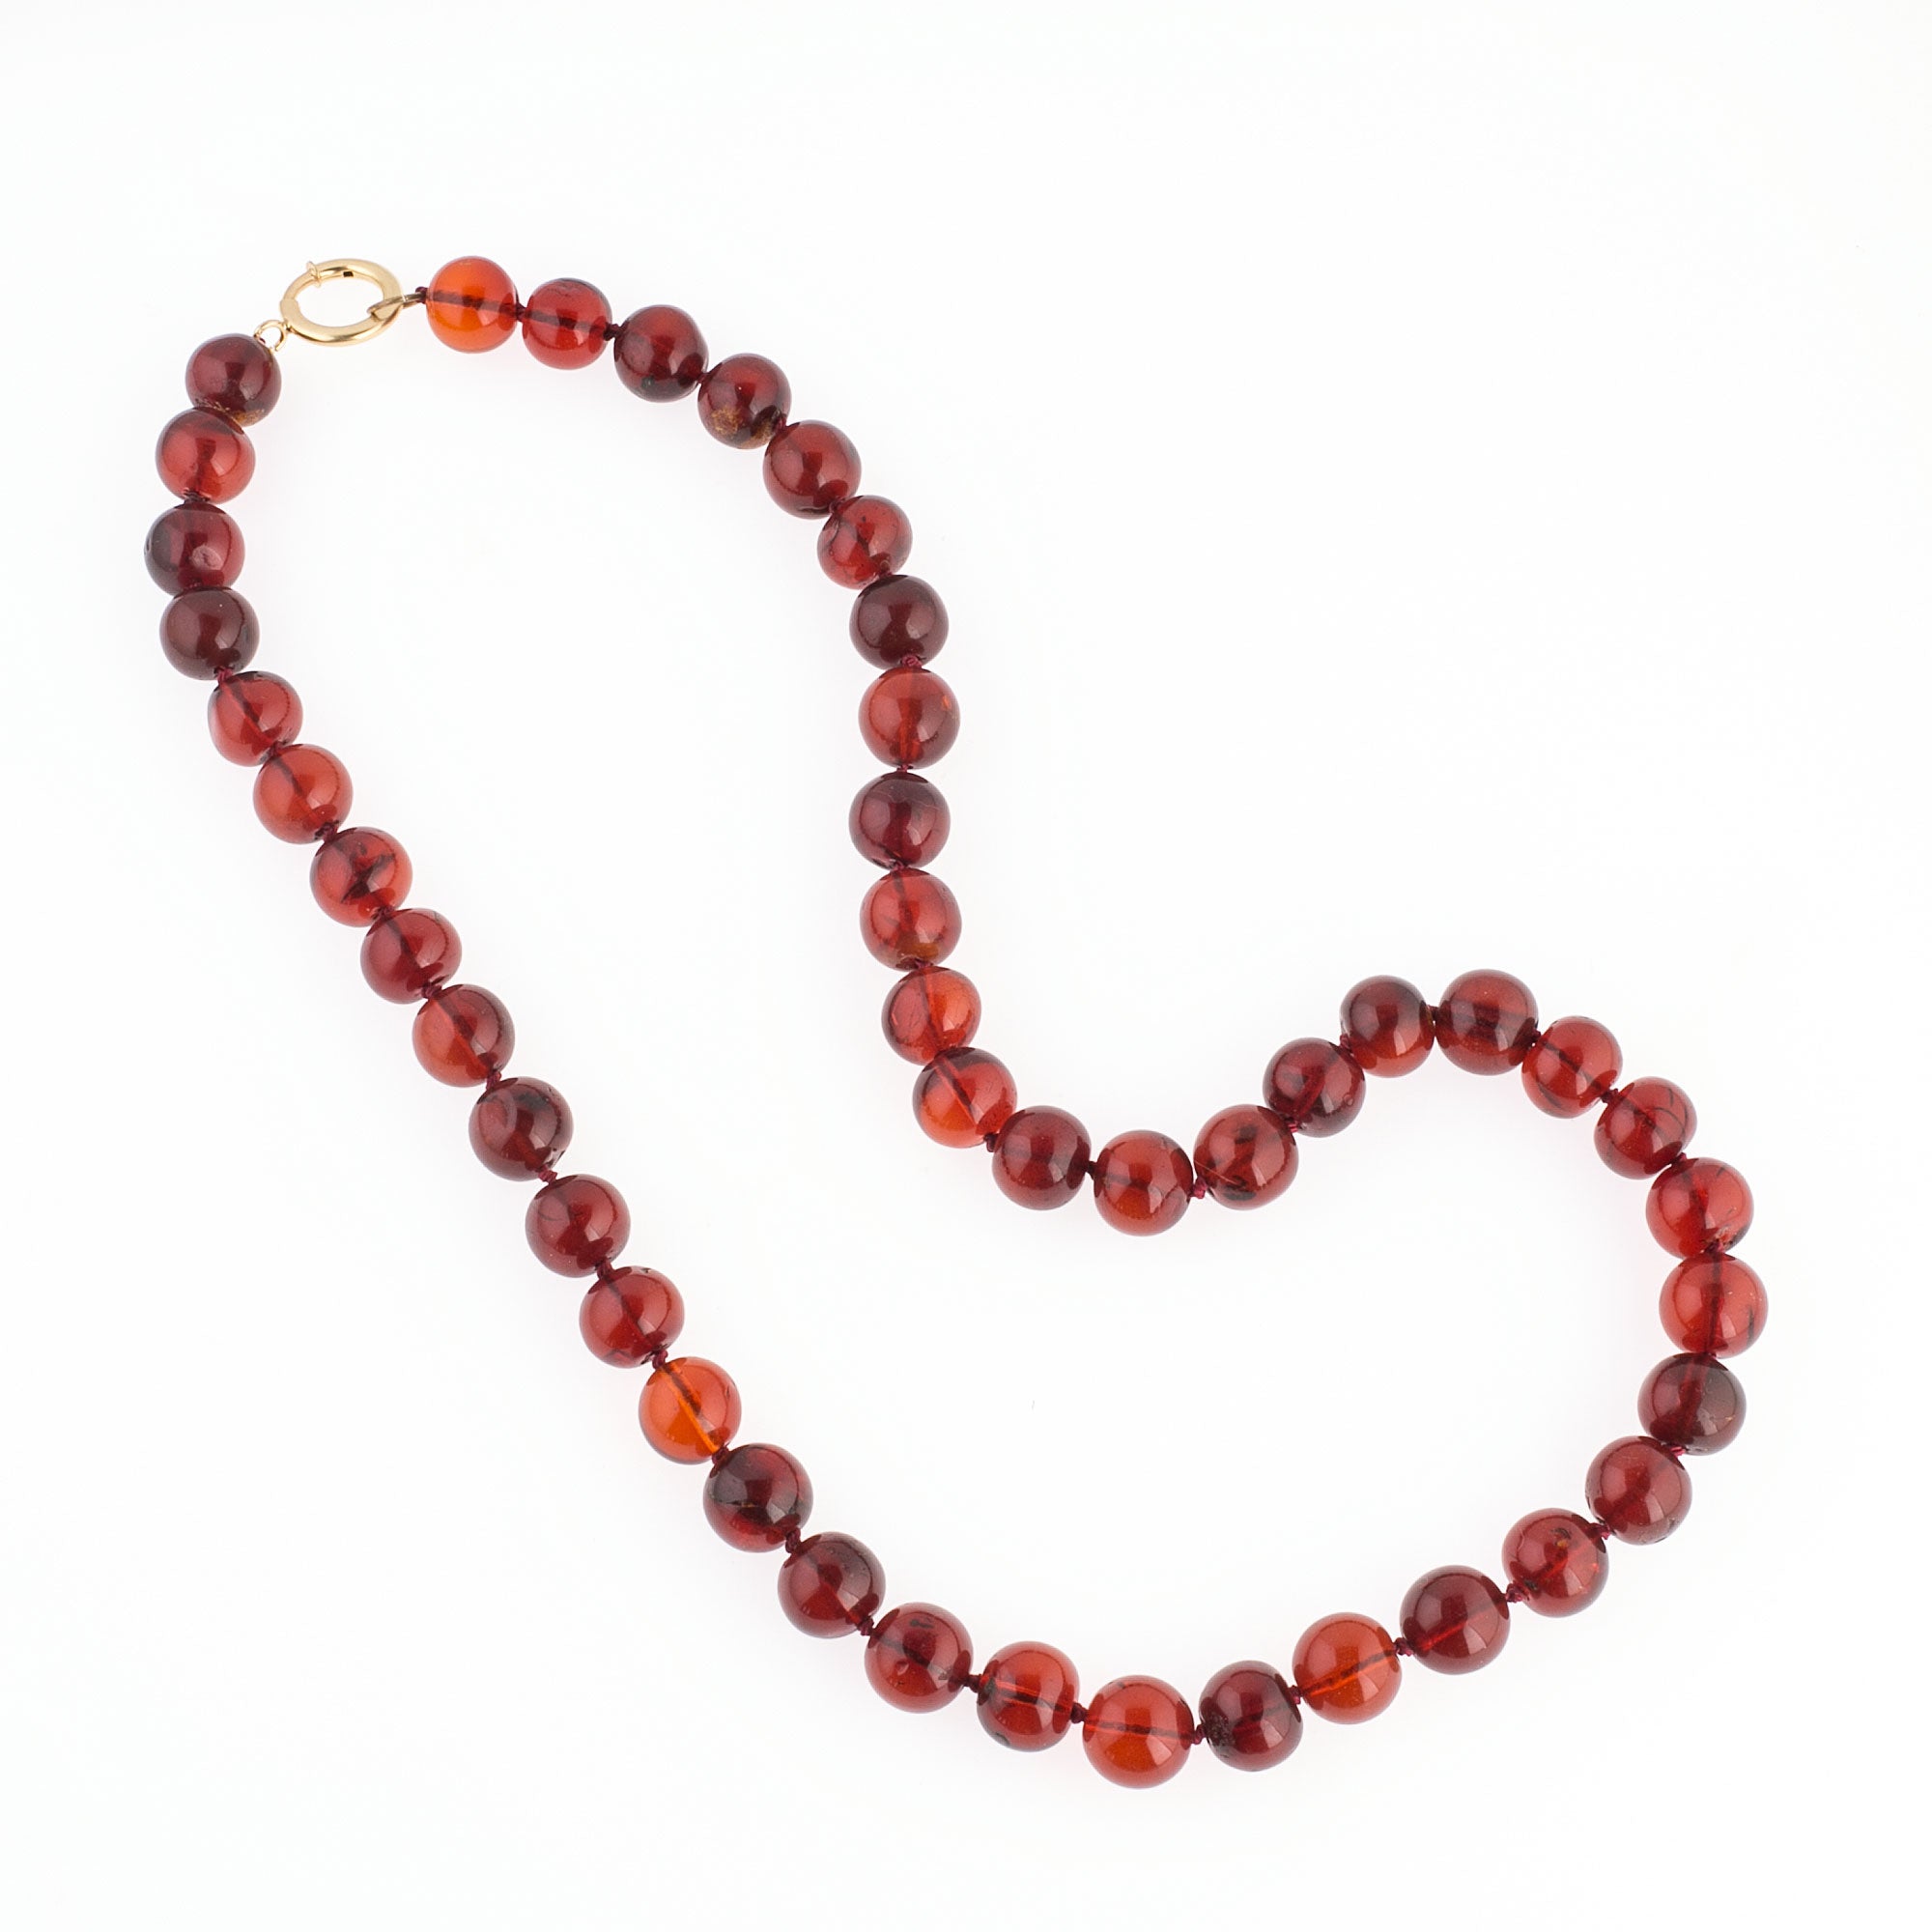 Antique large graduated cherry amber faceted bead necklace